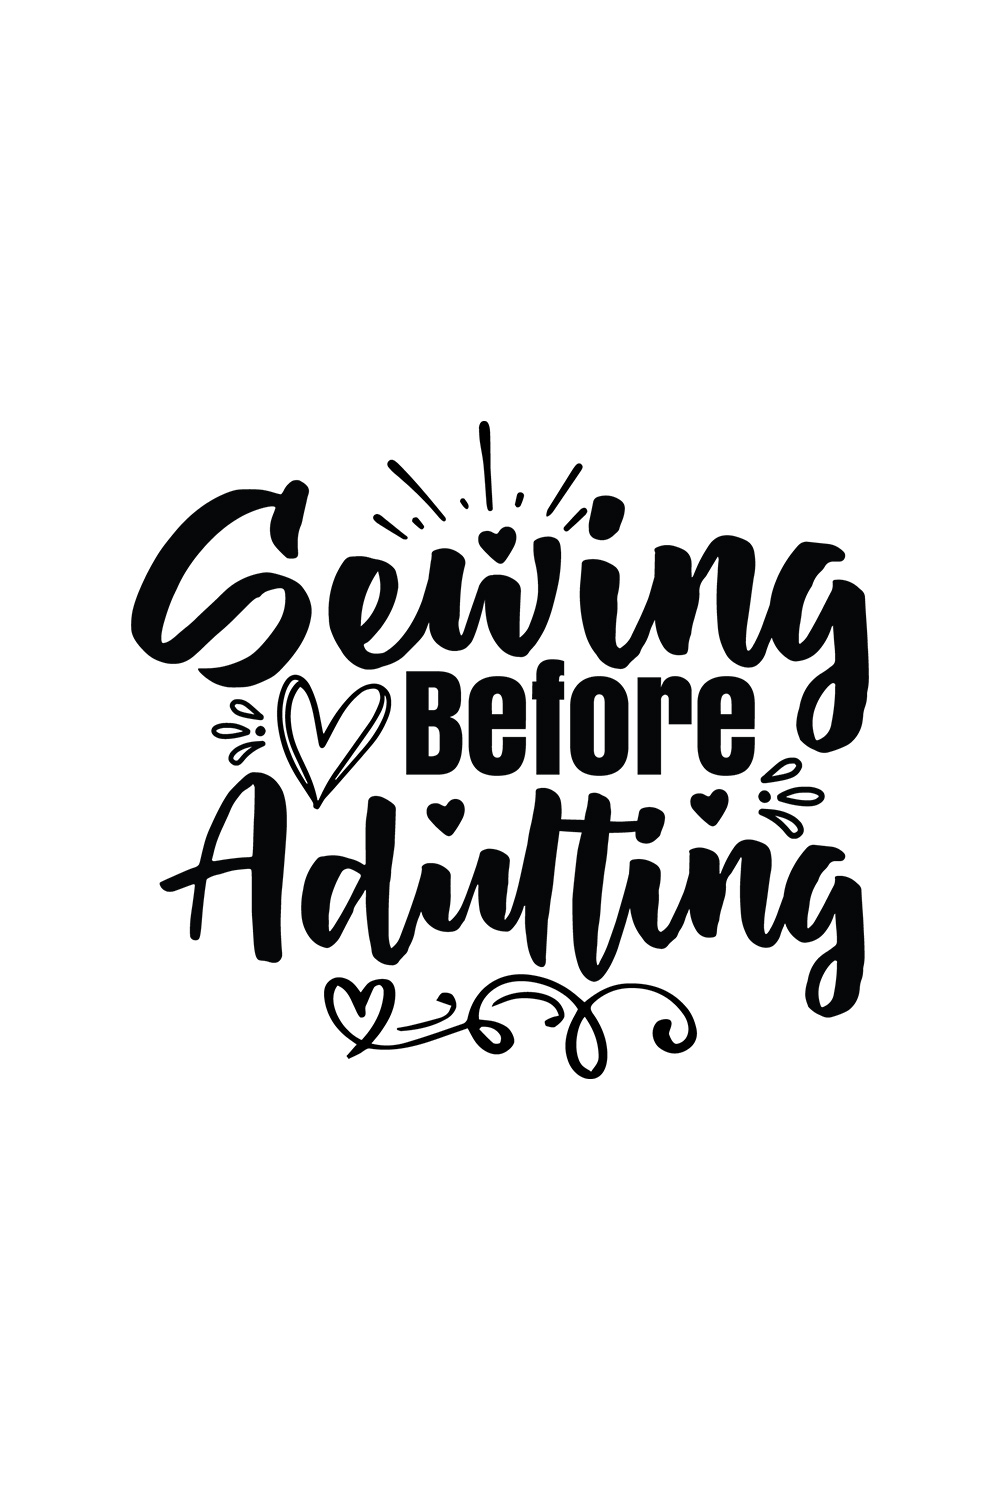 Sewing Before Adulting Typography SVG pinterest image.